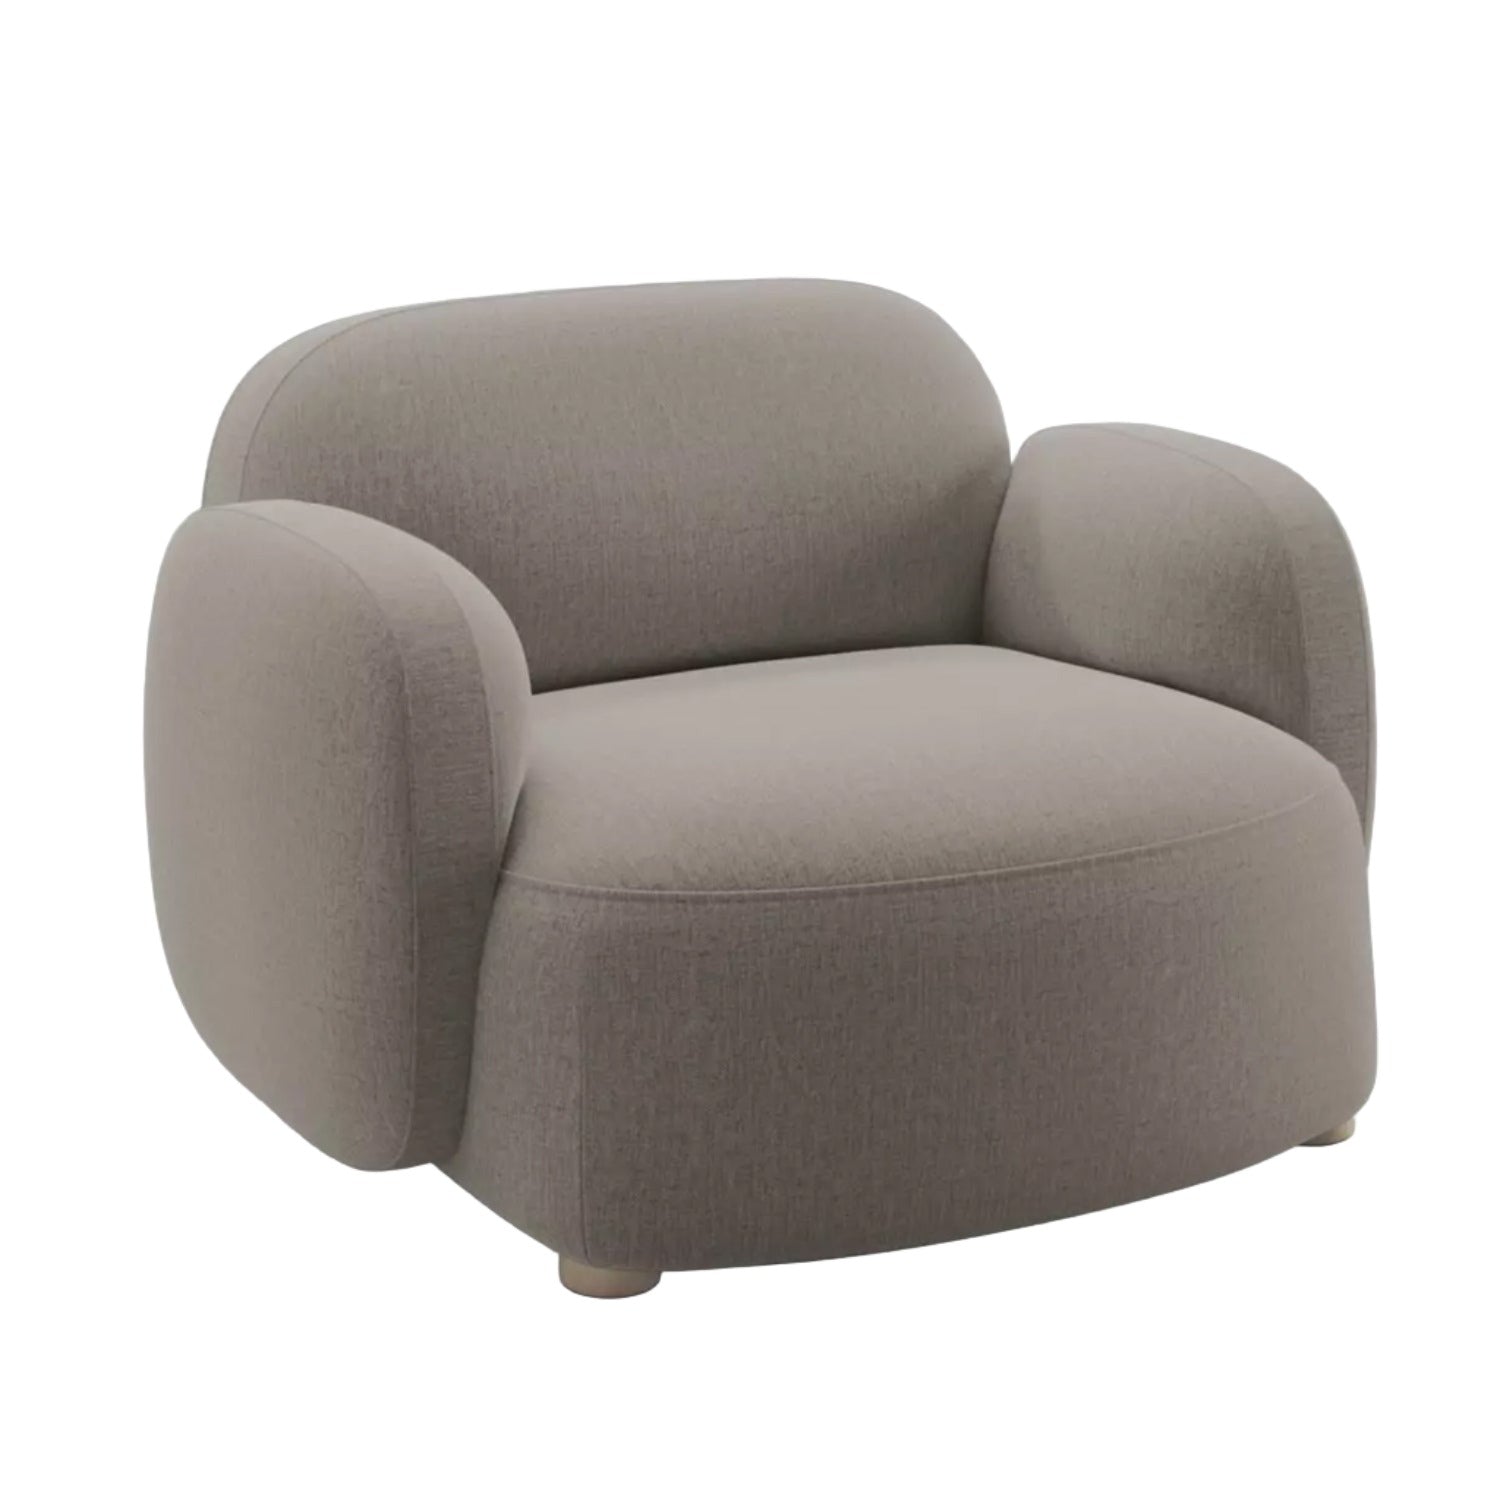 Northern Gem Lounge Chair with Armrest in  Brusvik 66